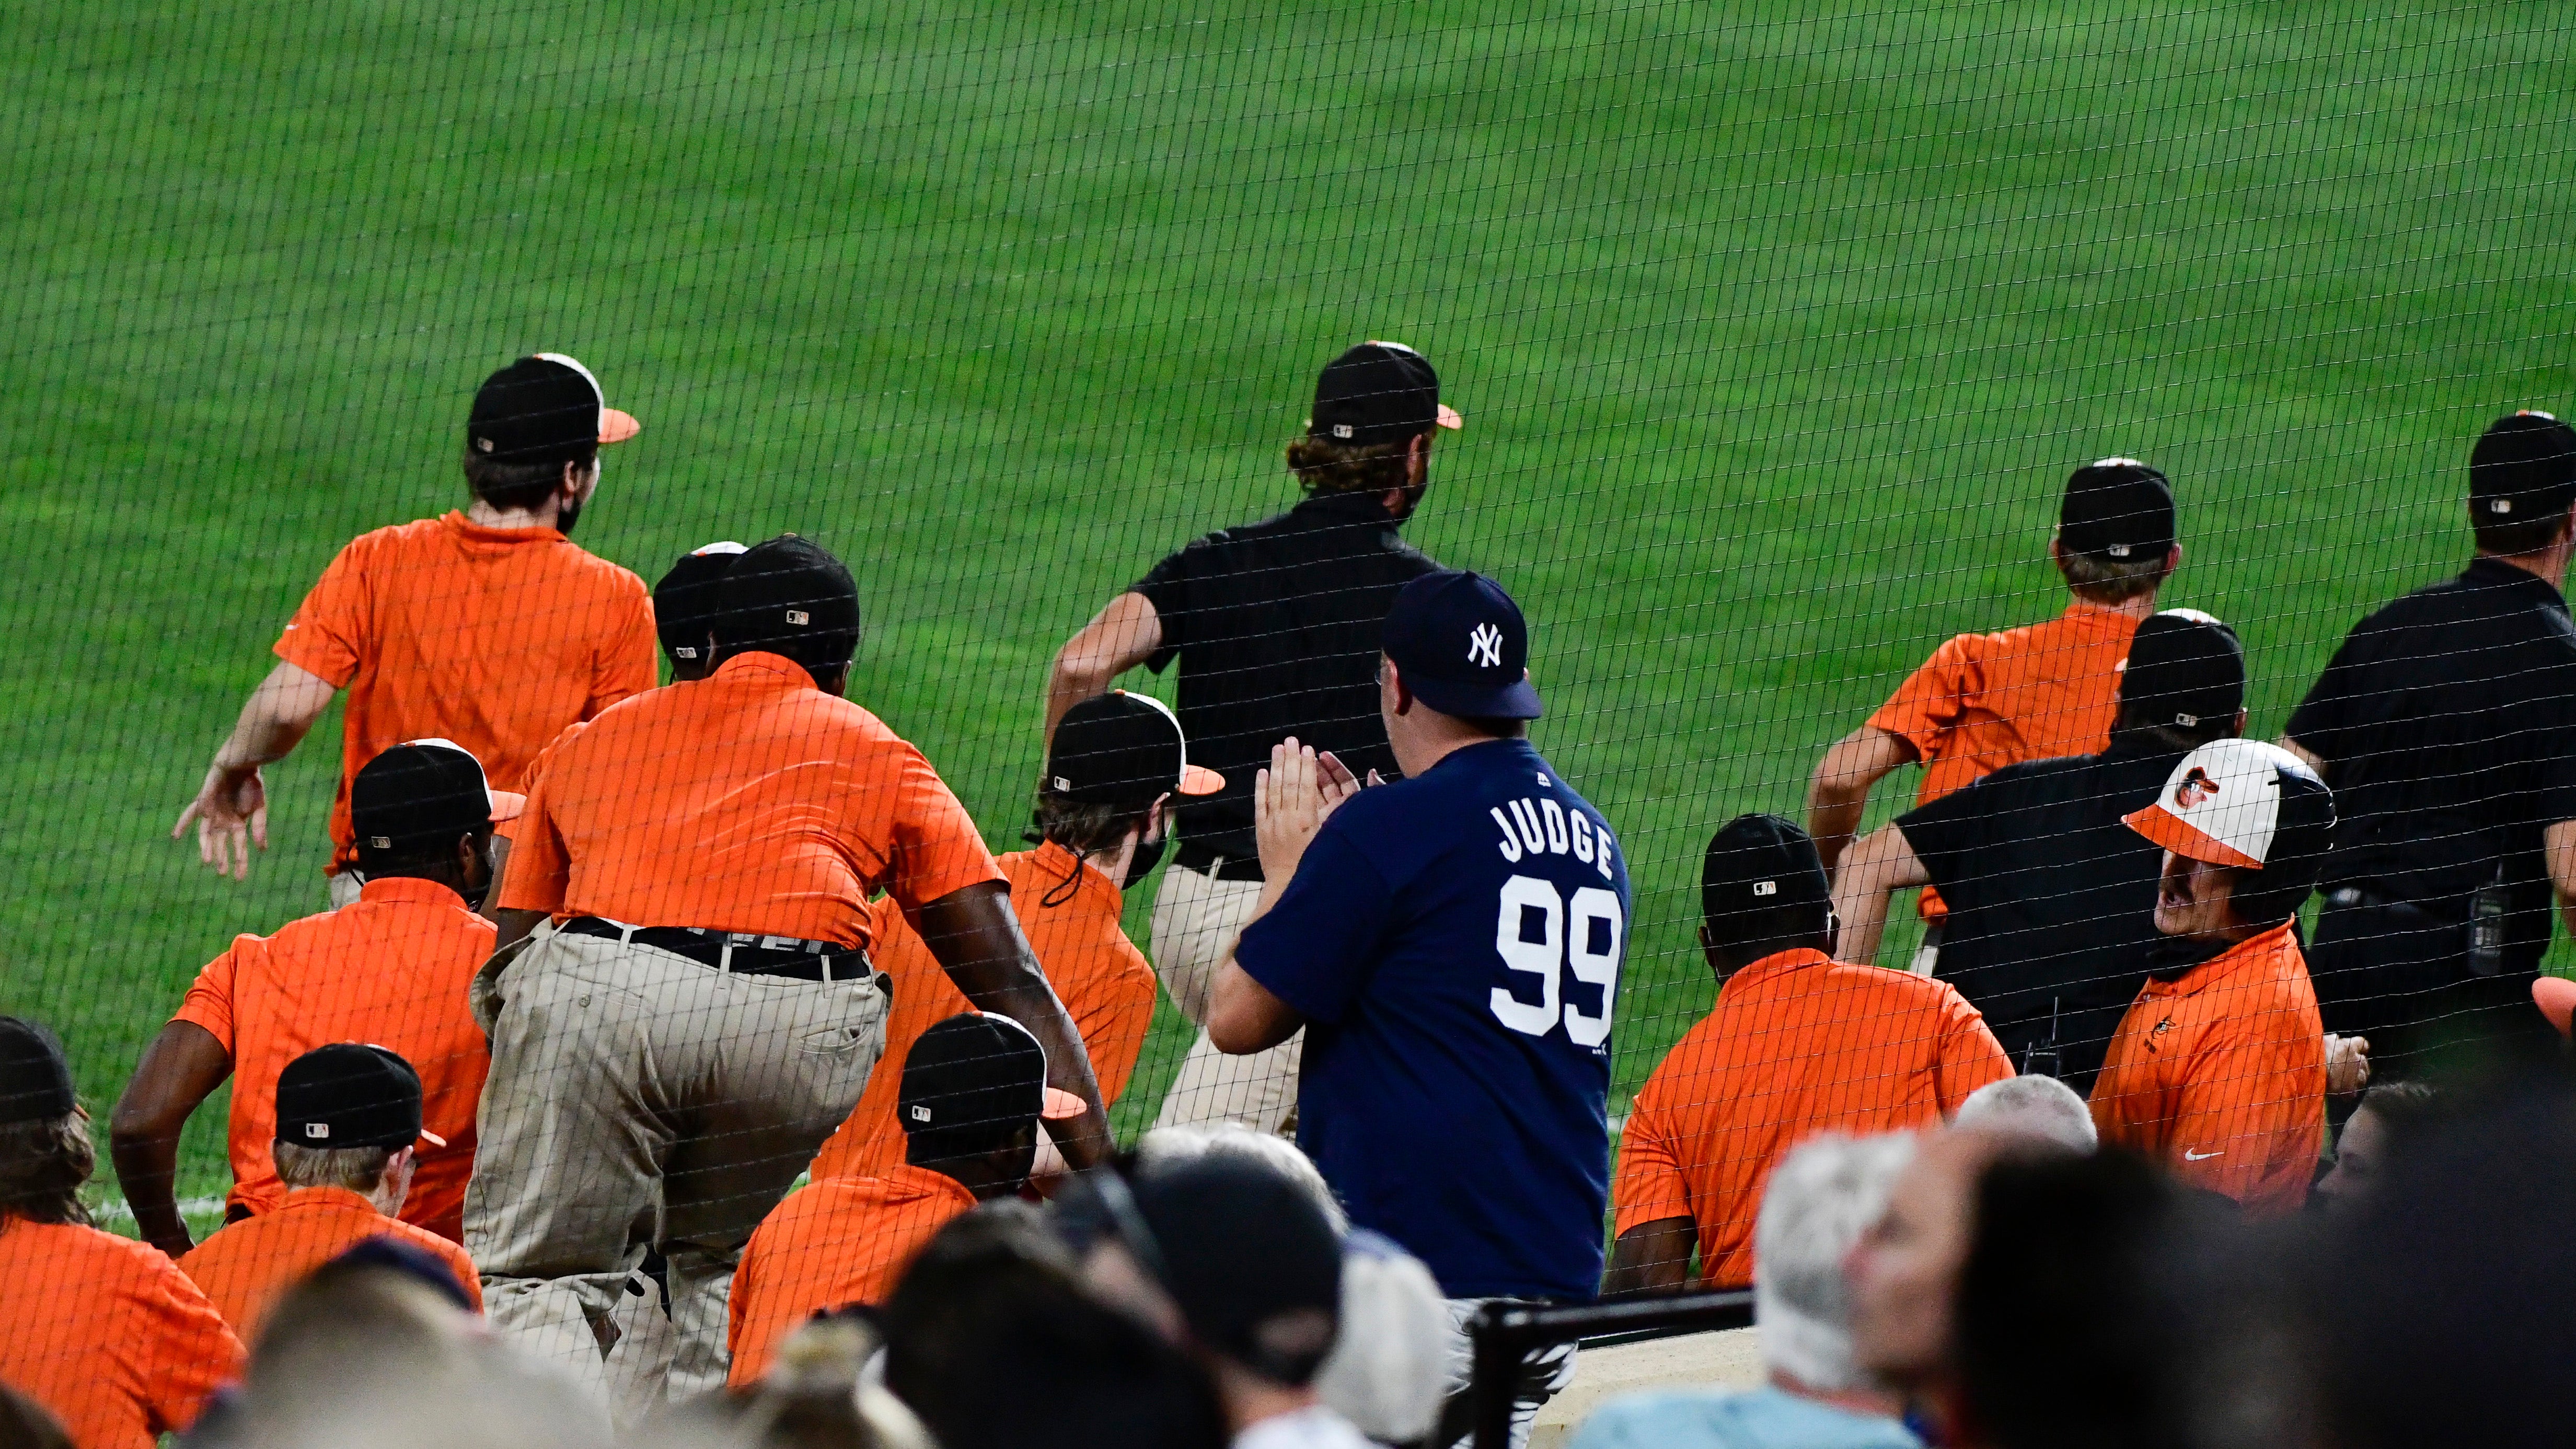 Umpire drilled in face by throw in Mets-Cardinals game